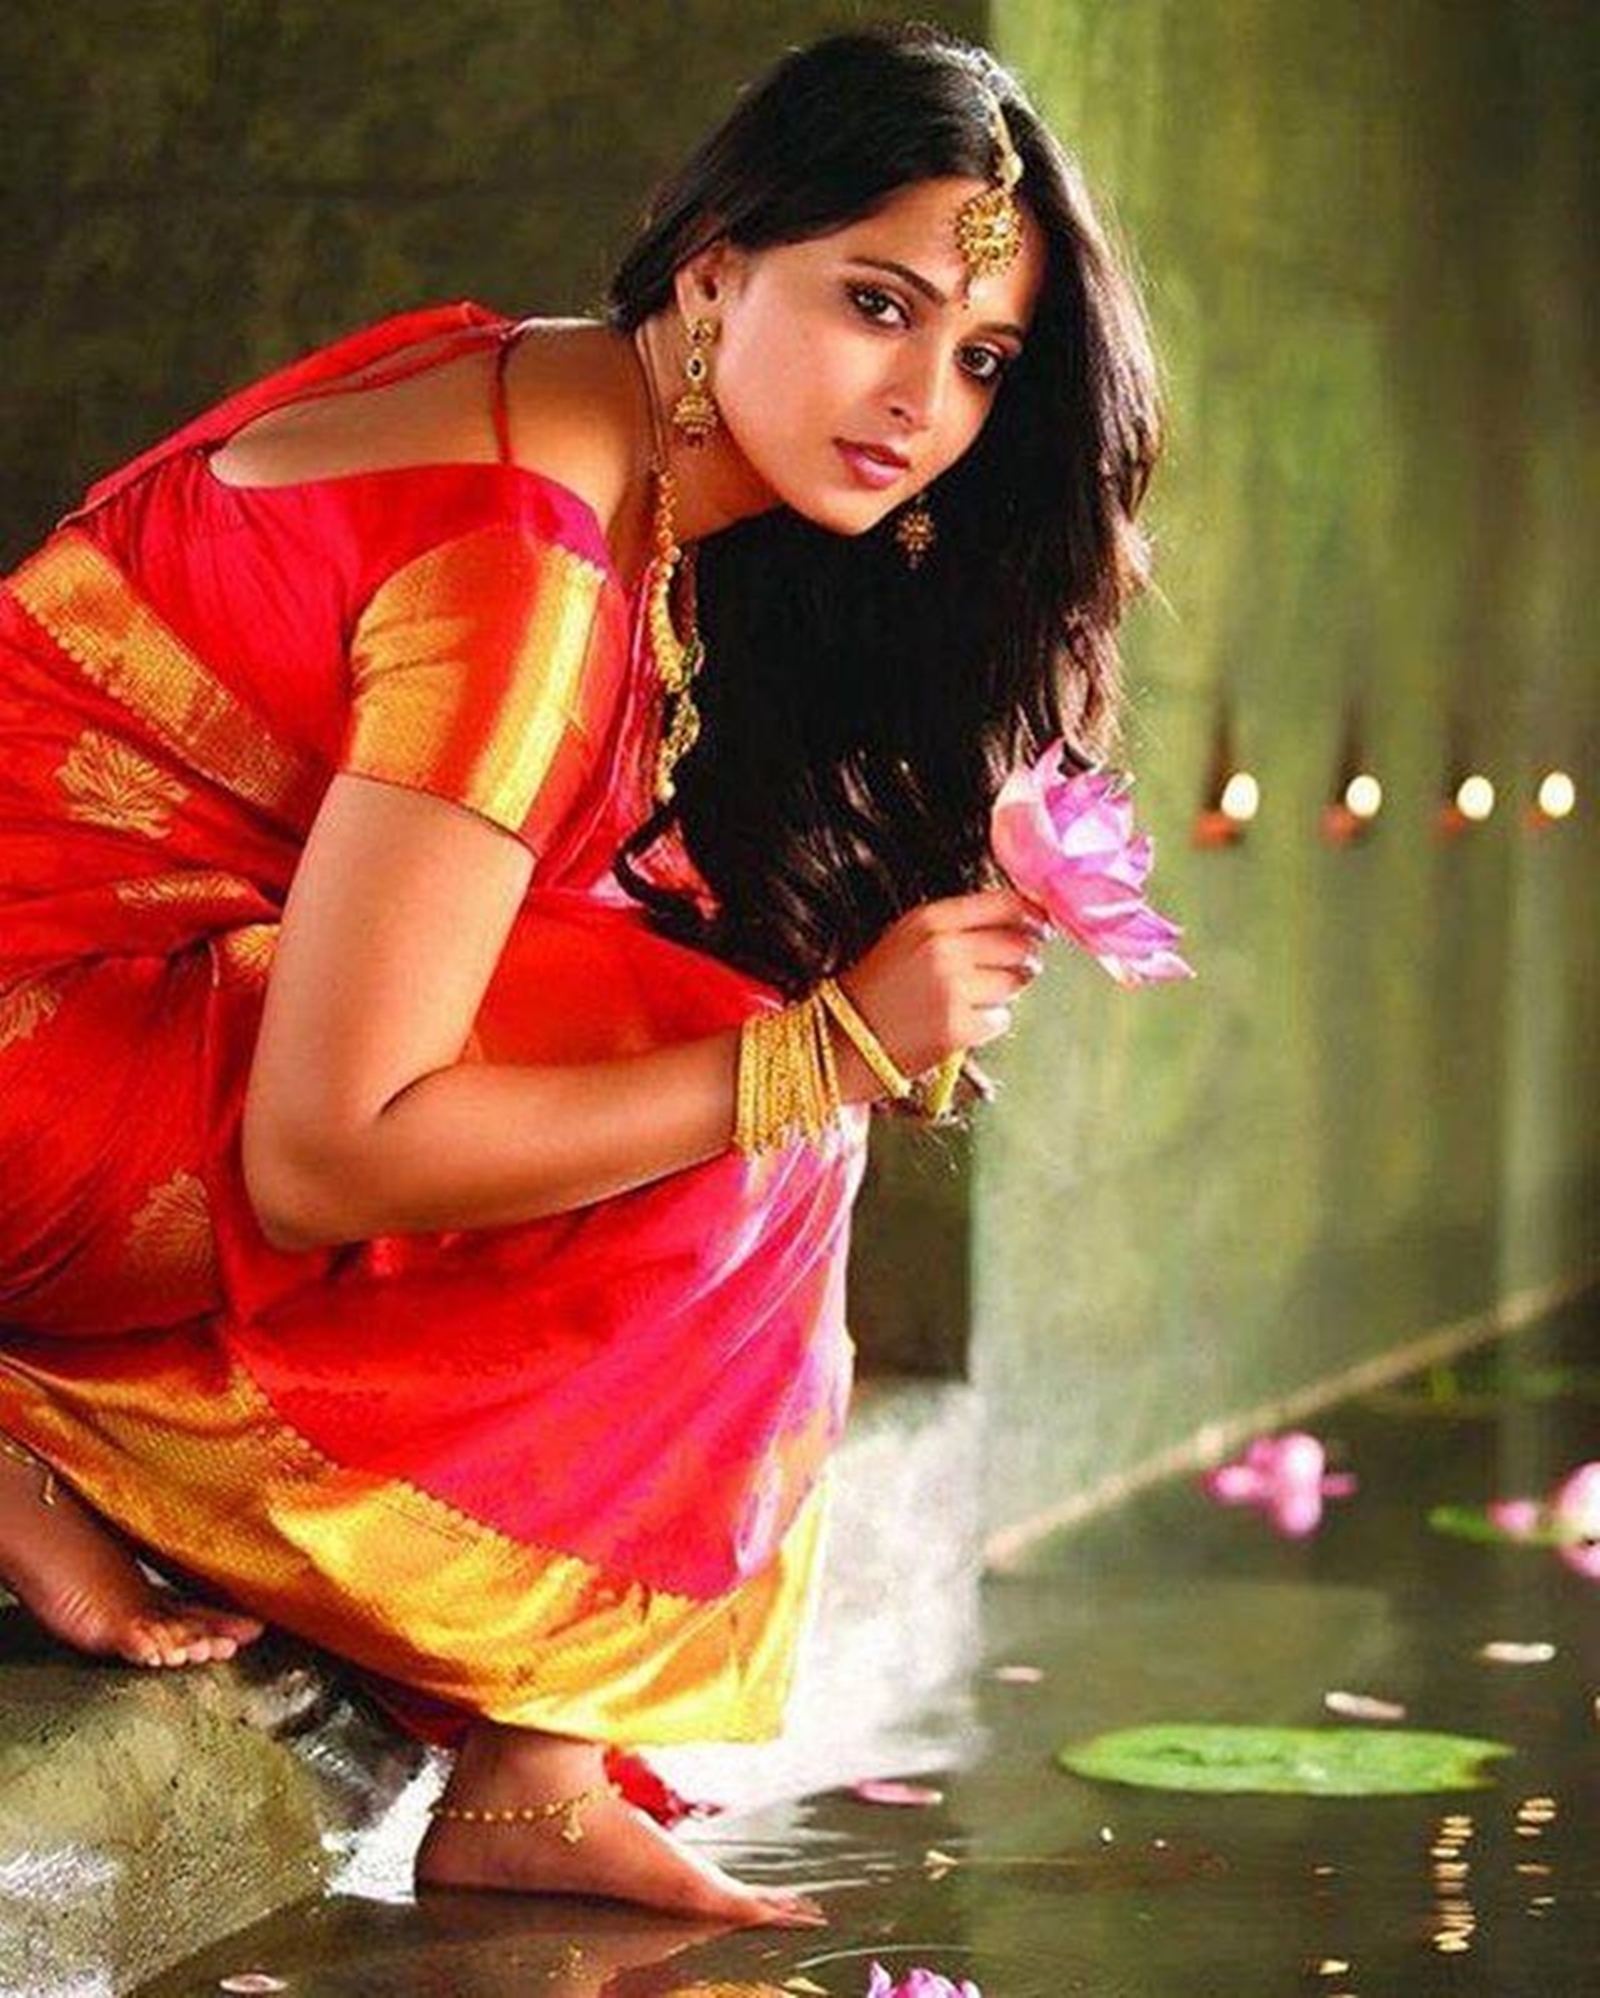 Devasena Sex Video - The Anushka Shetty style: Defying odds while being the mistress of own  decisions | Telugu News - The Indian Express